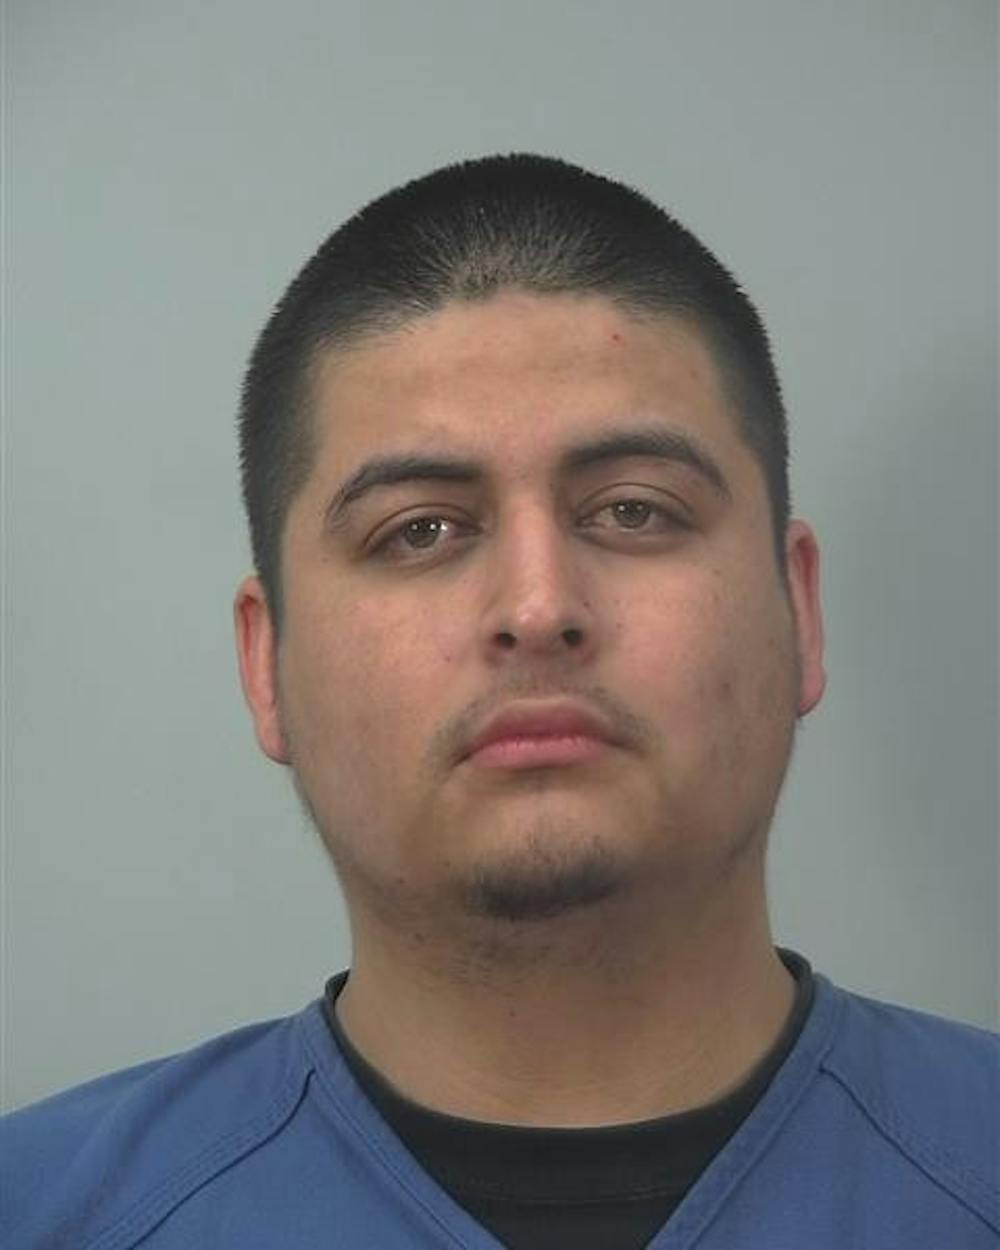 Madison police arrested 23-year-old Ulices Lopez Guadarrama after the alleged drunk driver crashed into a taxicab Saturday on West Dayton Street, injuring a 55-year-old man.